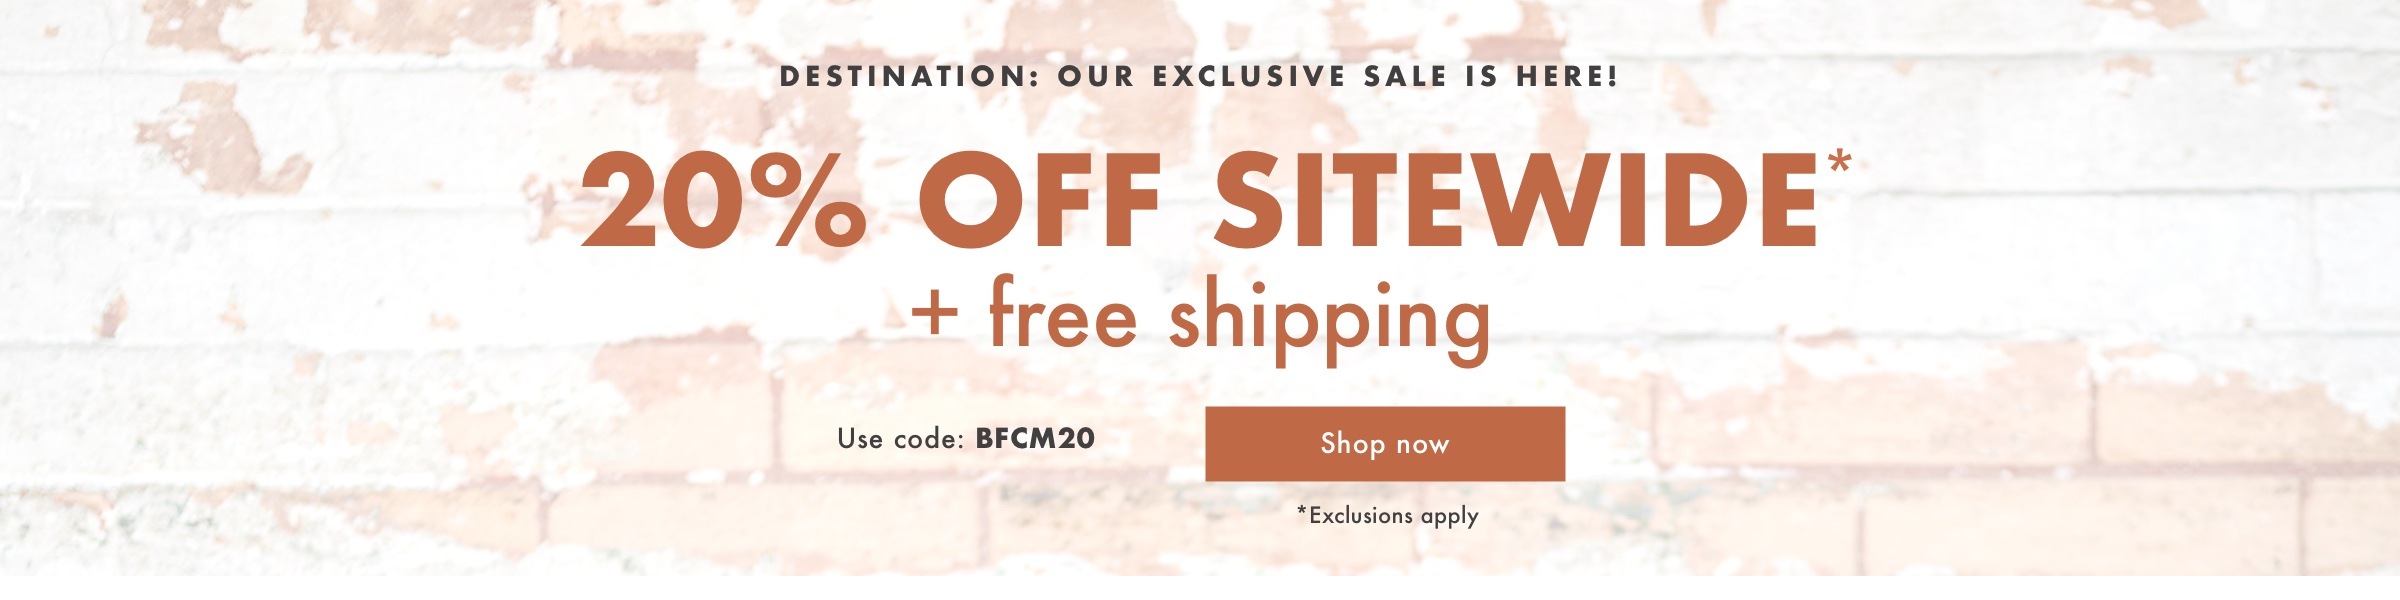 Destination: Our Exclusive Sale is HERE! Get 20% Off Sitewide* + Free Shipping with code: BFCM20. Shop now.